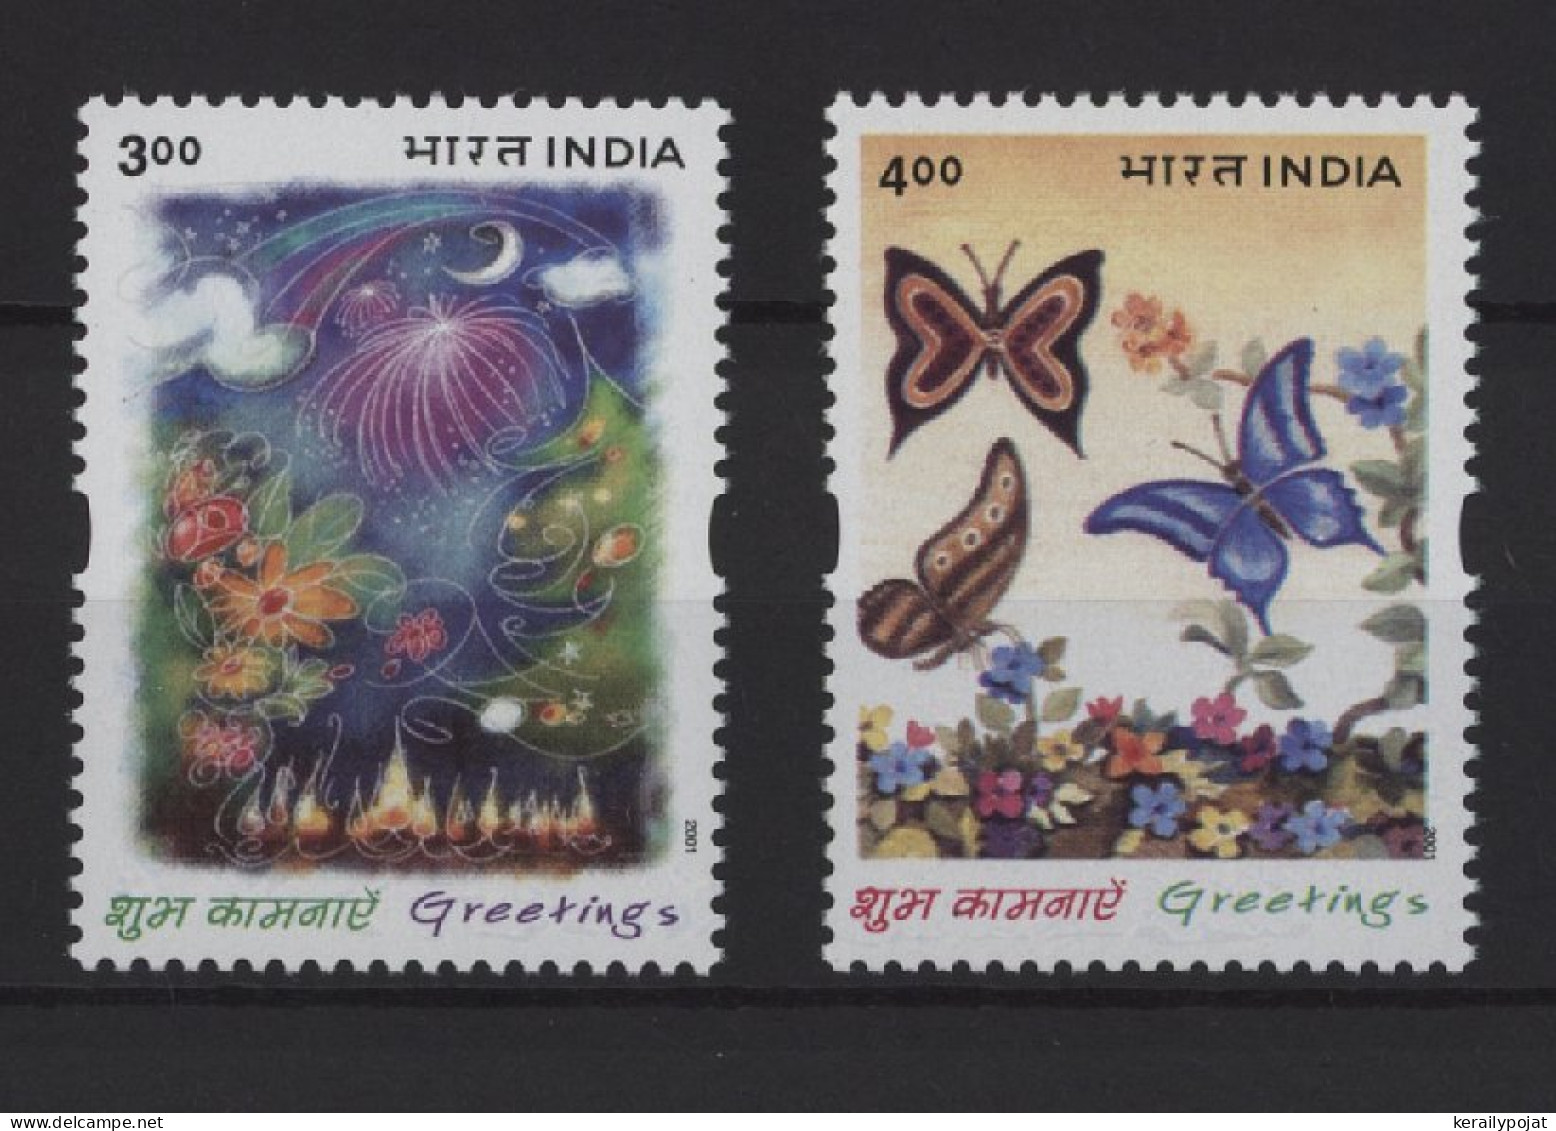 India - 2001 Greeting Stamps MNH__(TH-26891) - Nuevos